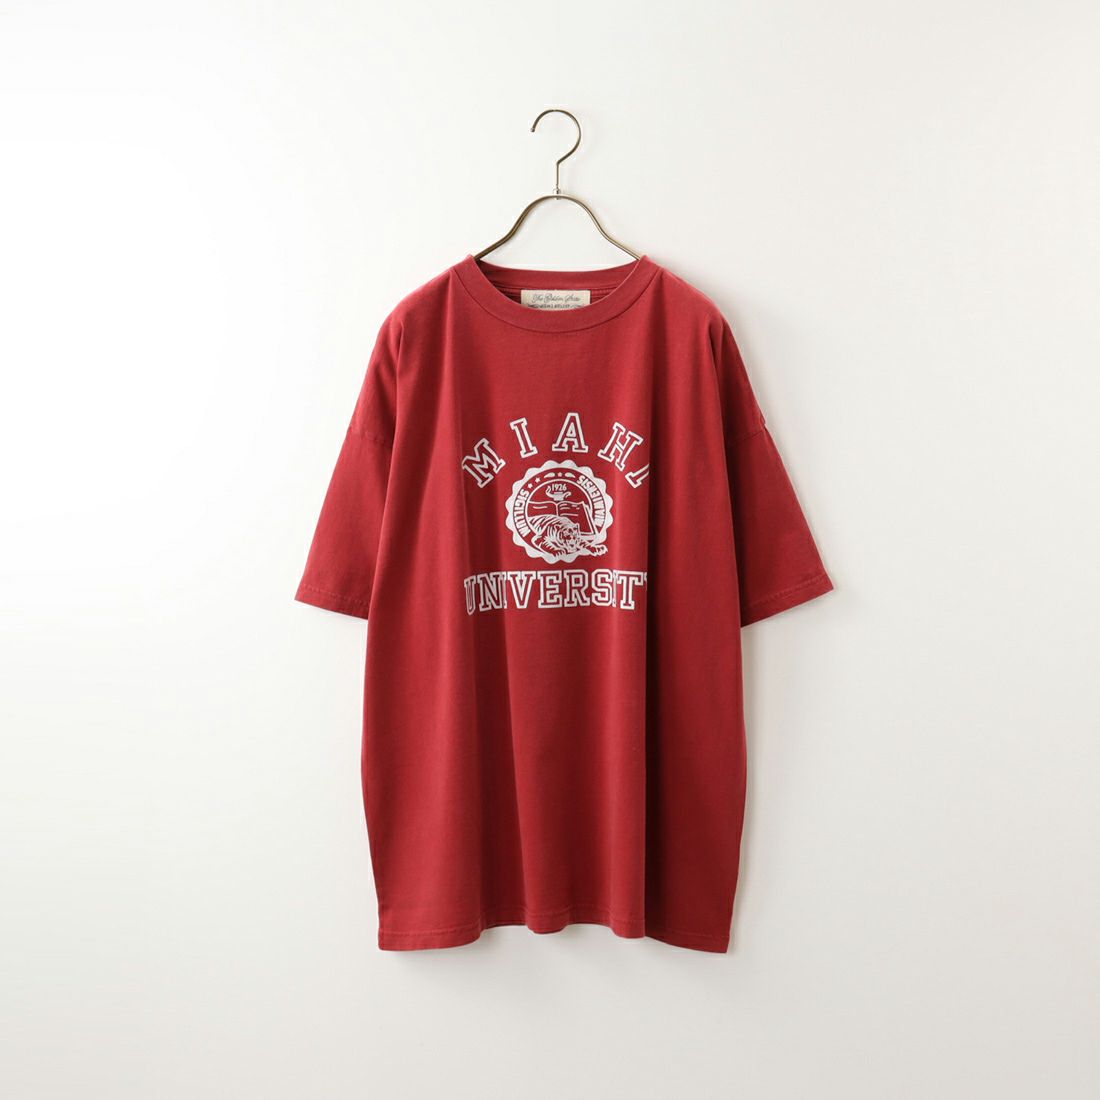 REMI RELIEF [レミレリーフ] 別注 20天竺プリントTシャツ MIAHI  [RN24329270-JF]｜ジーンズファクトリー公式通販サイト - JEANS FACTORY Online Shop